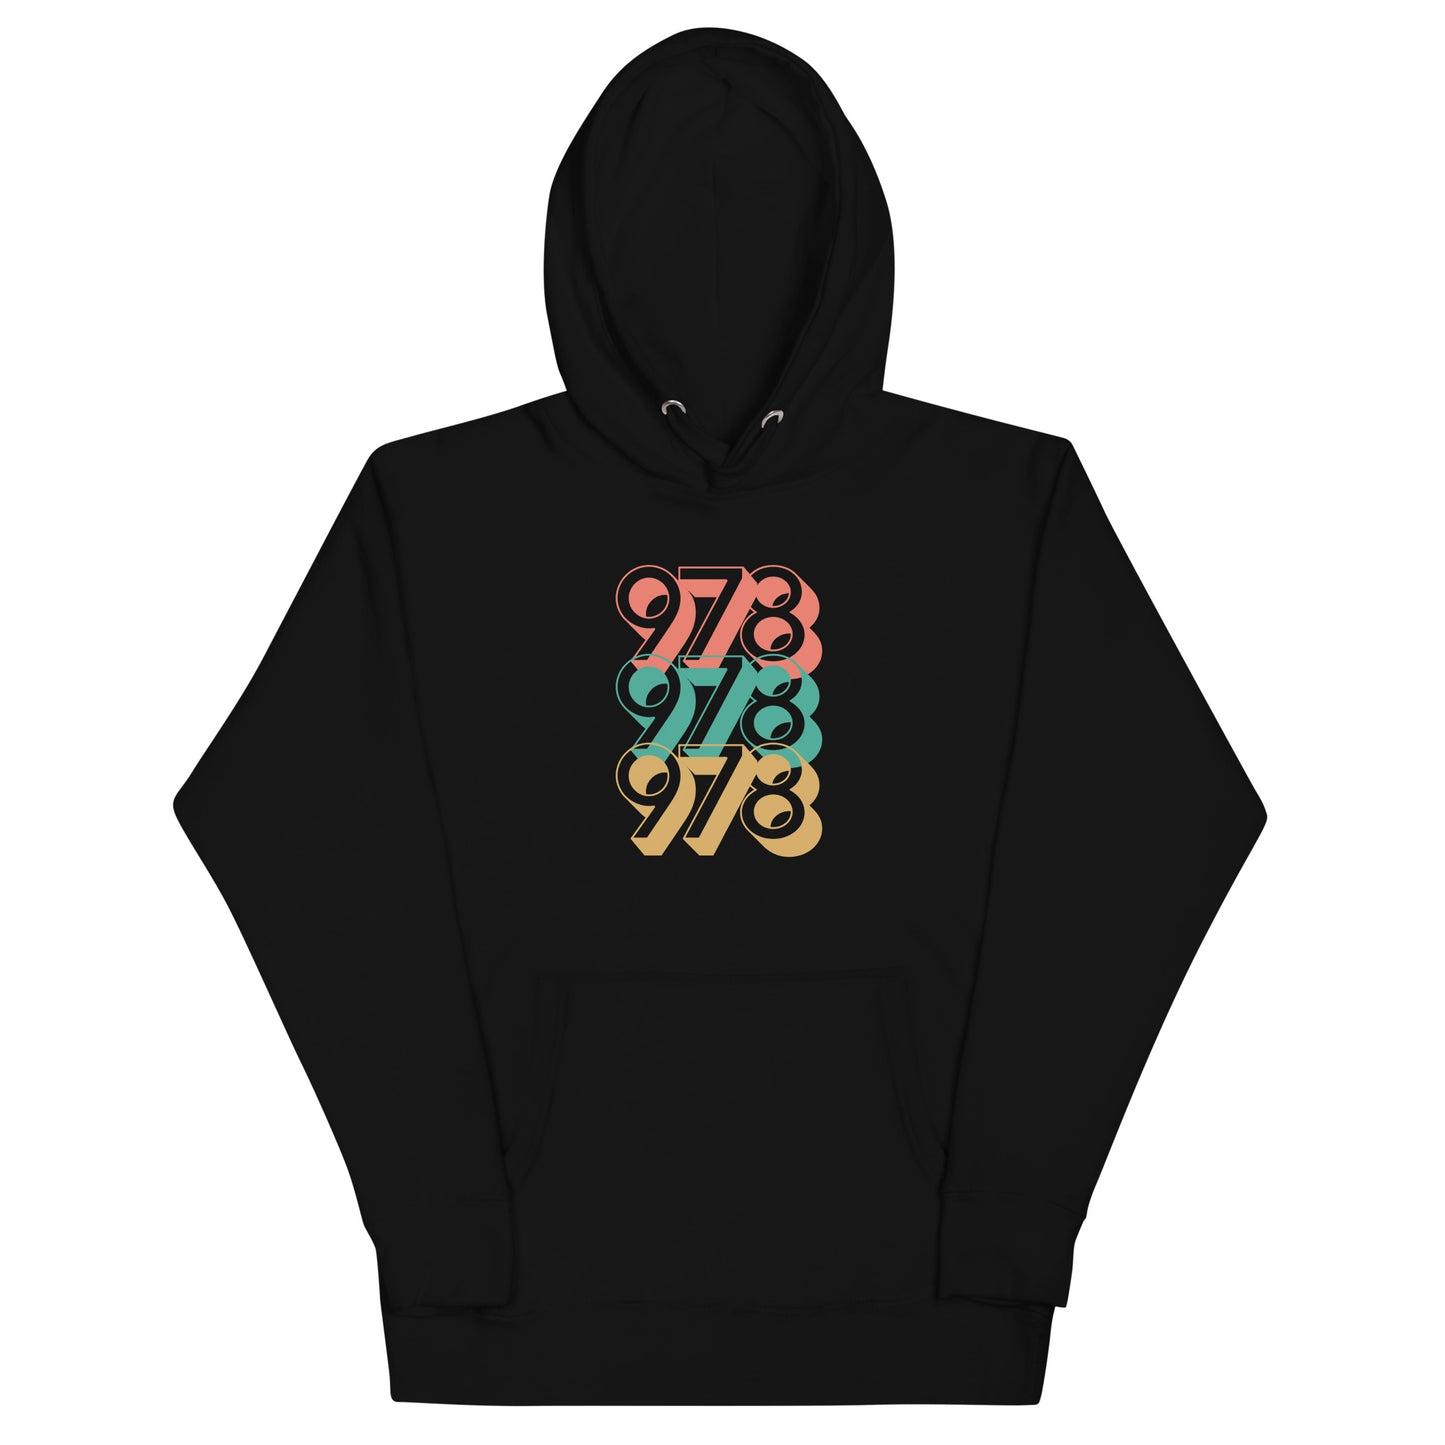 black hoodie with three 978s in red green and yellow